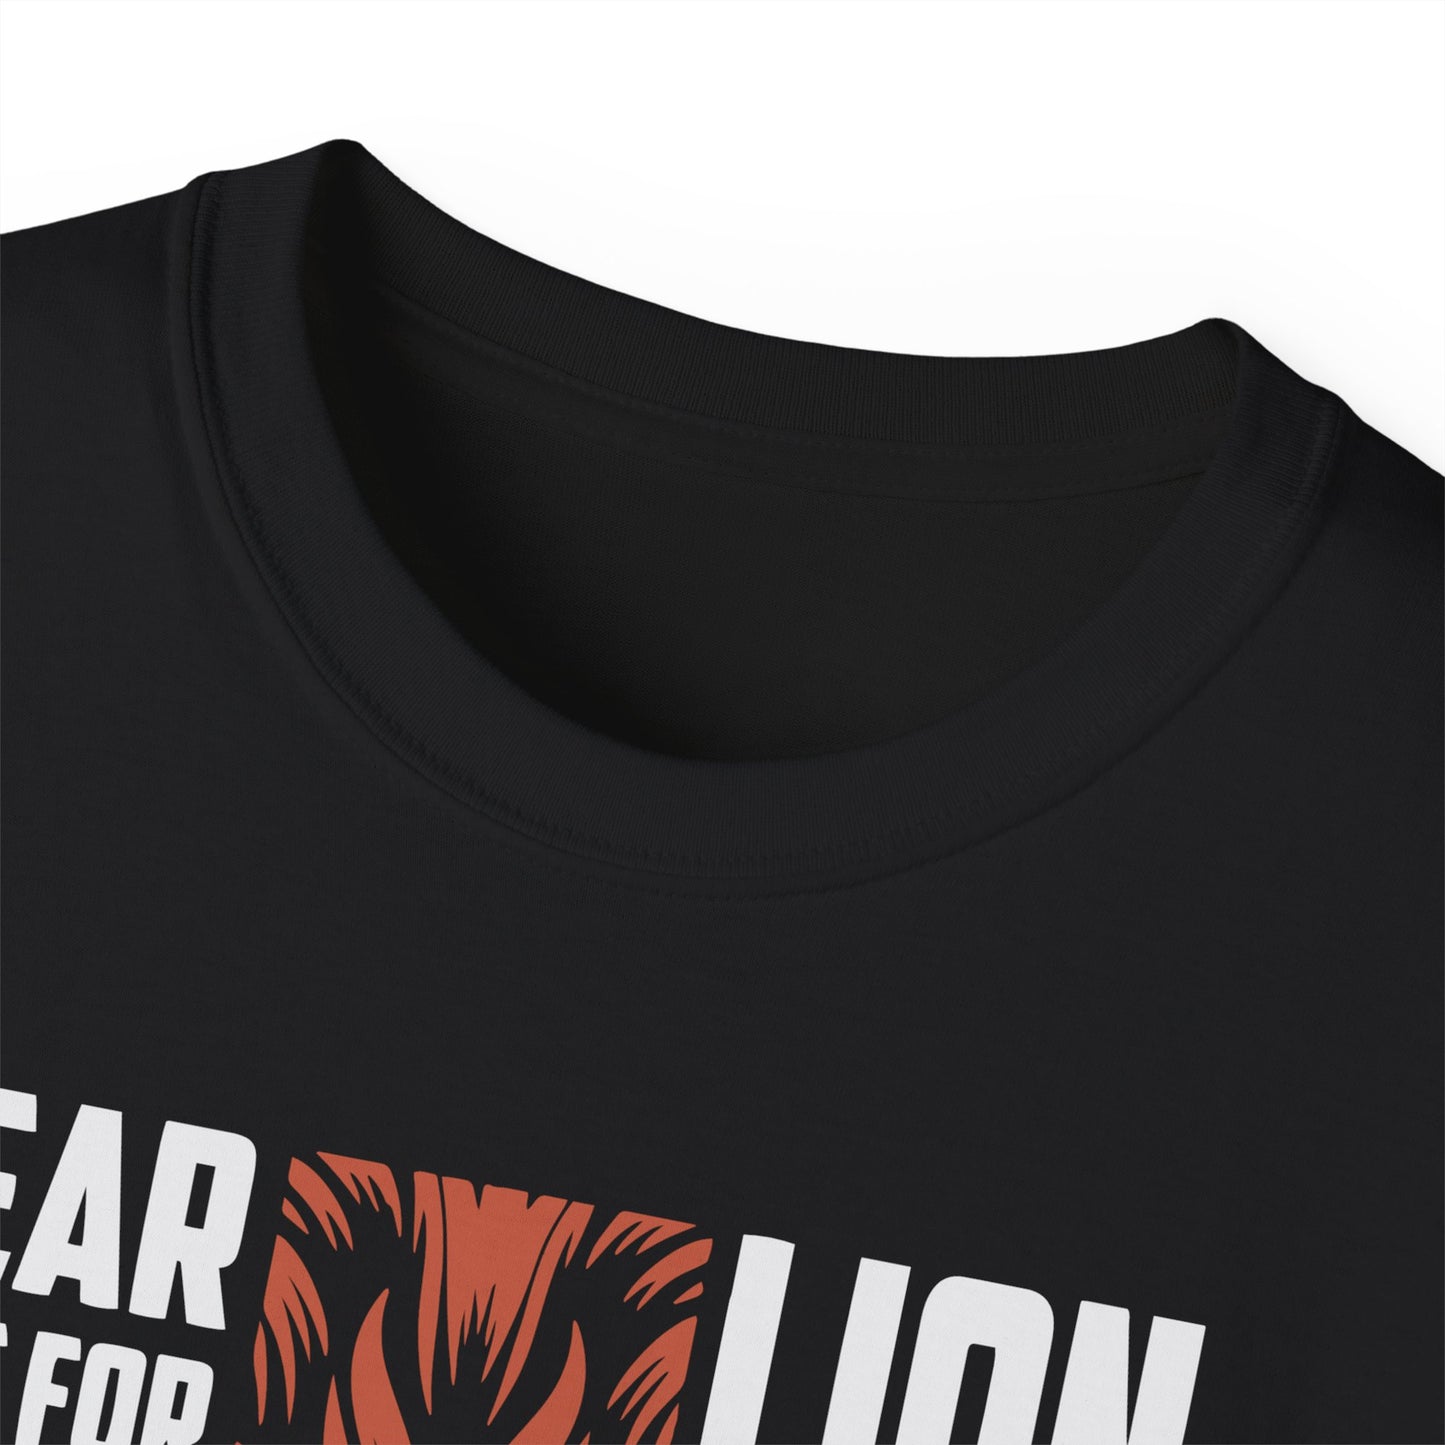 Fear Not For Jesus Lion Of Judah Has Triumphed Unisex Christian Ultra Cotton Tee Printify